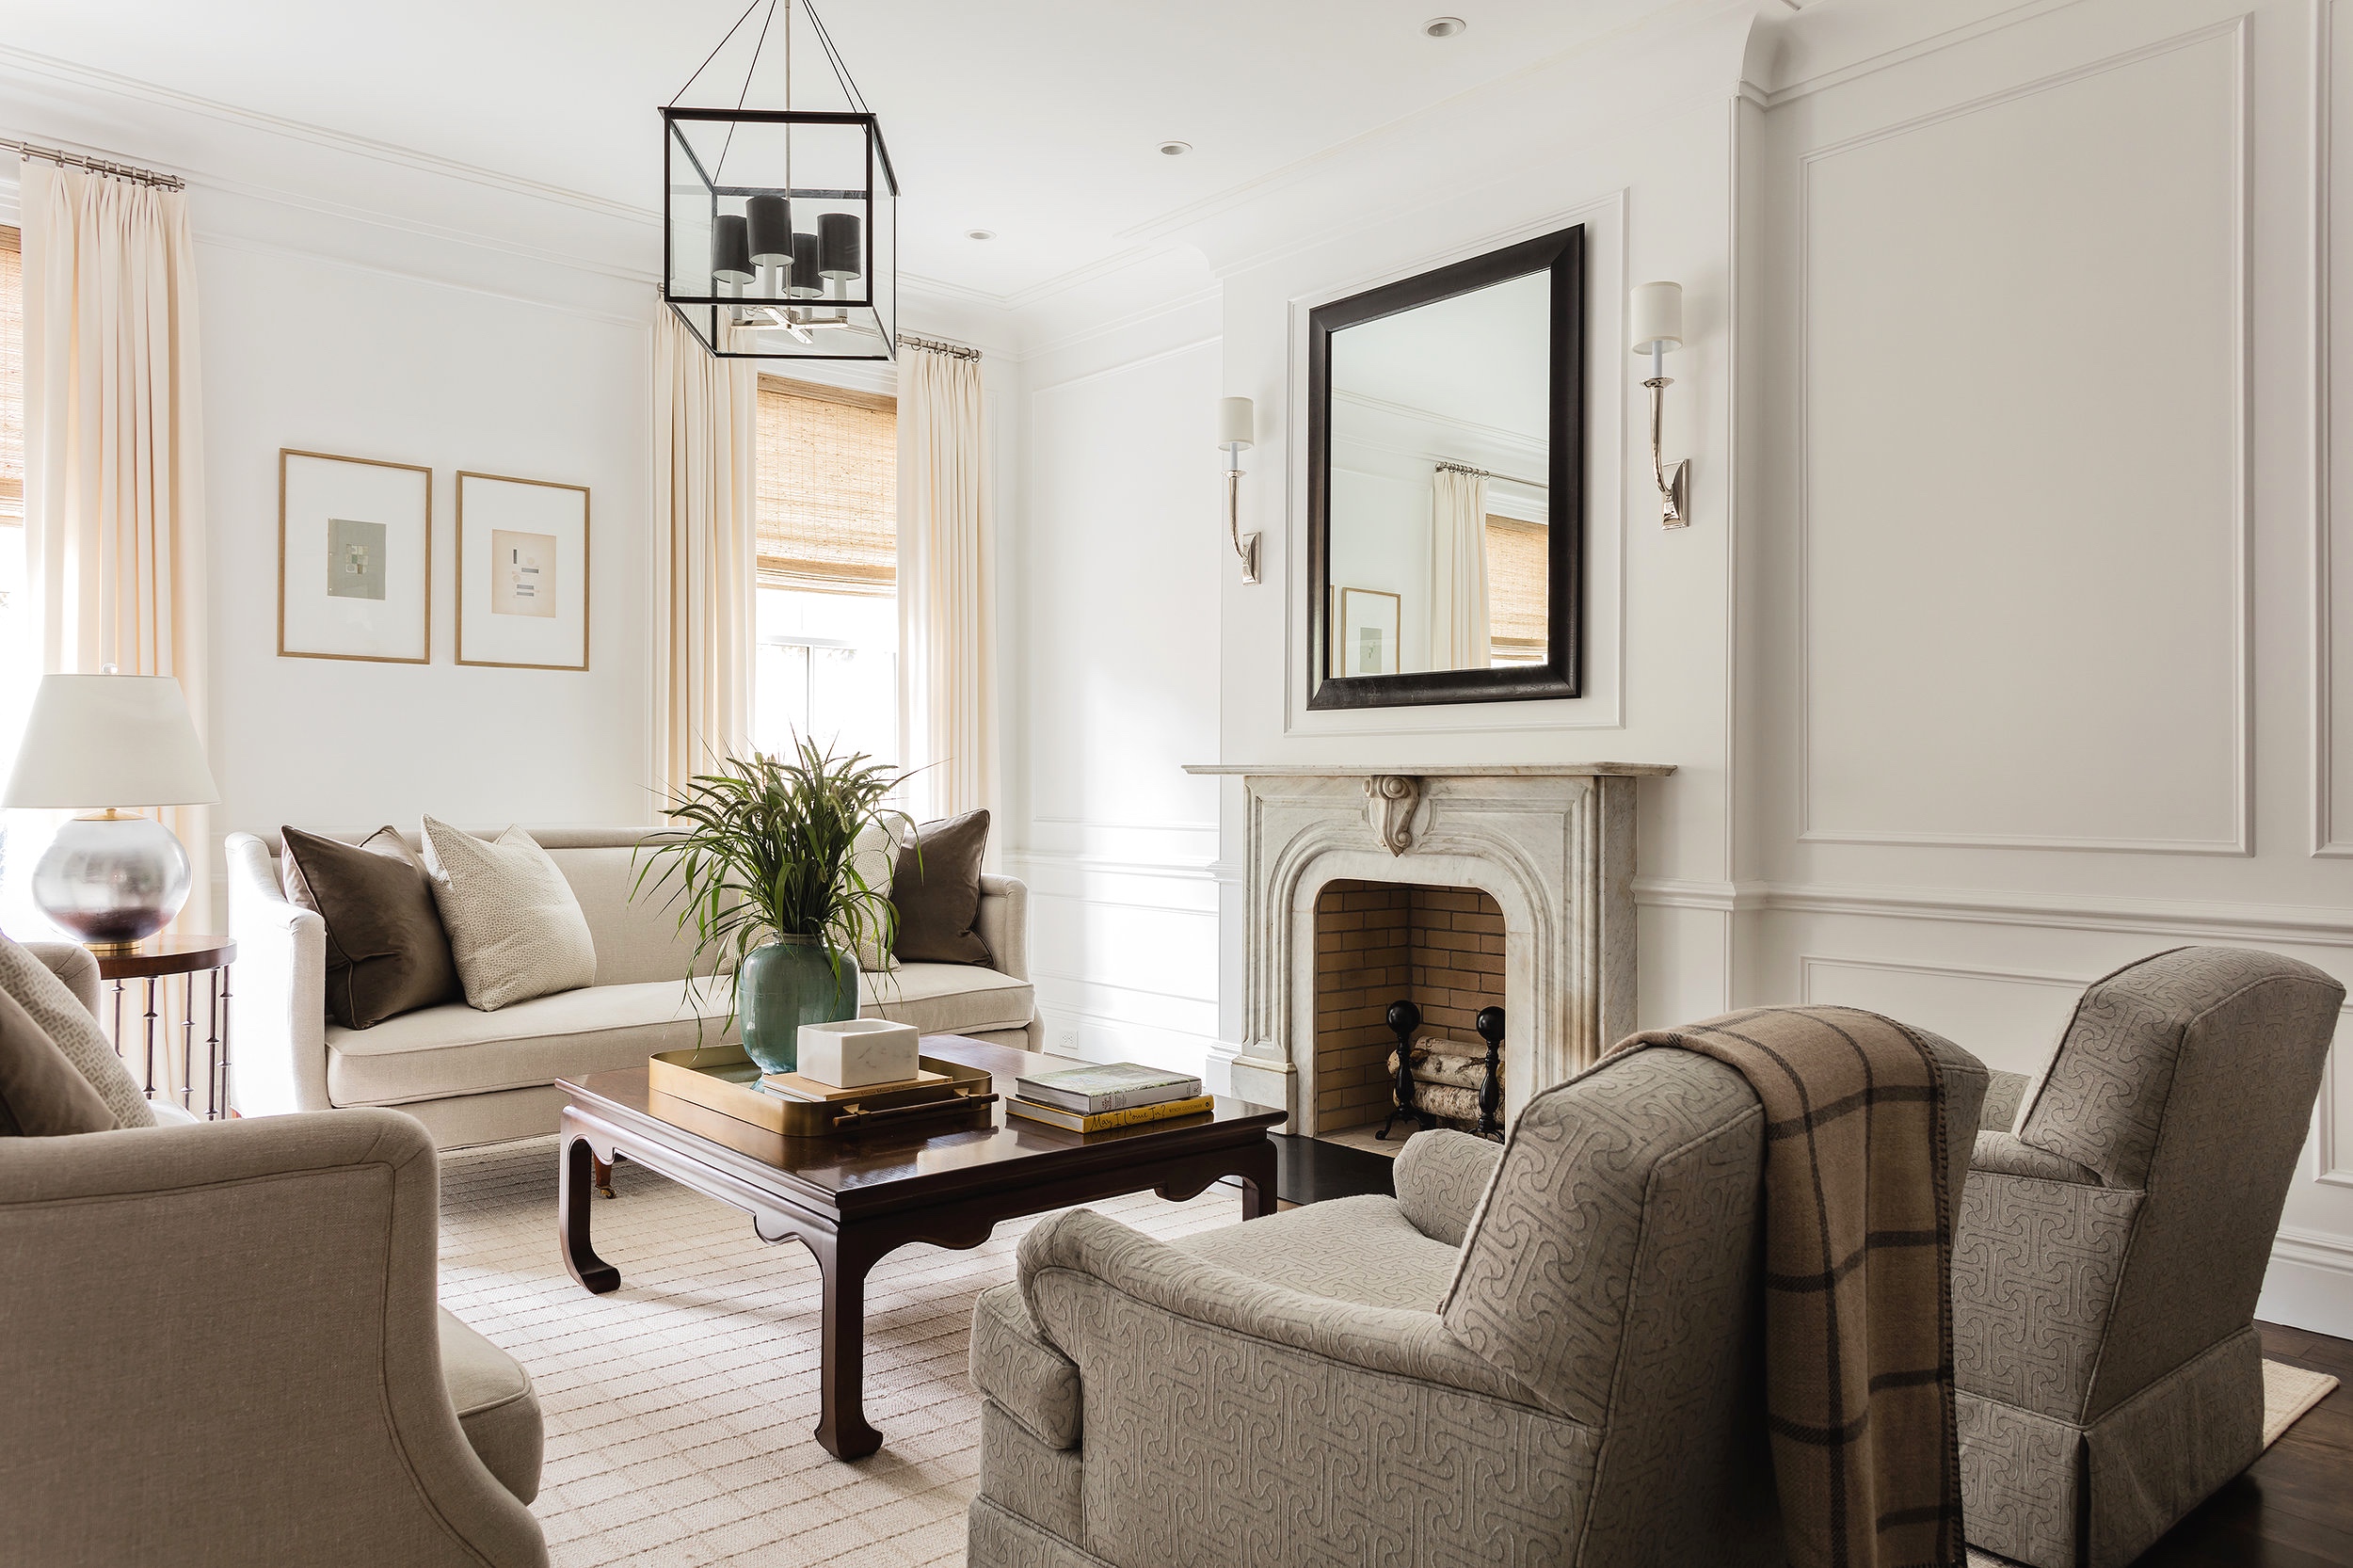 DESIGNING A TIMELESS HOME IS NO EASY FEAT, BUT THIS HOME NAILED IT | lark & linen